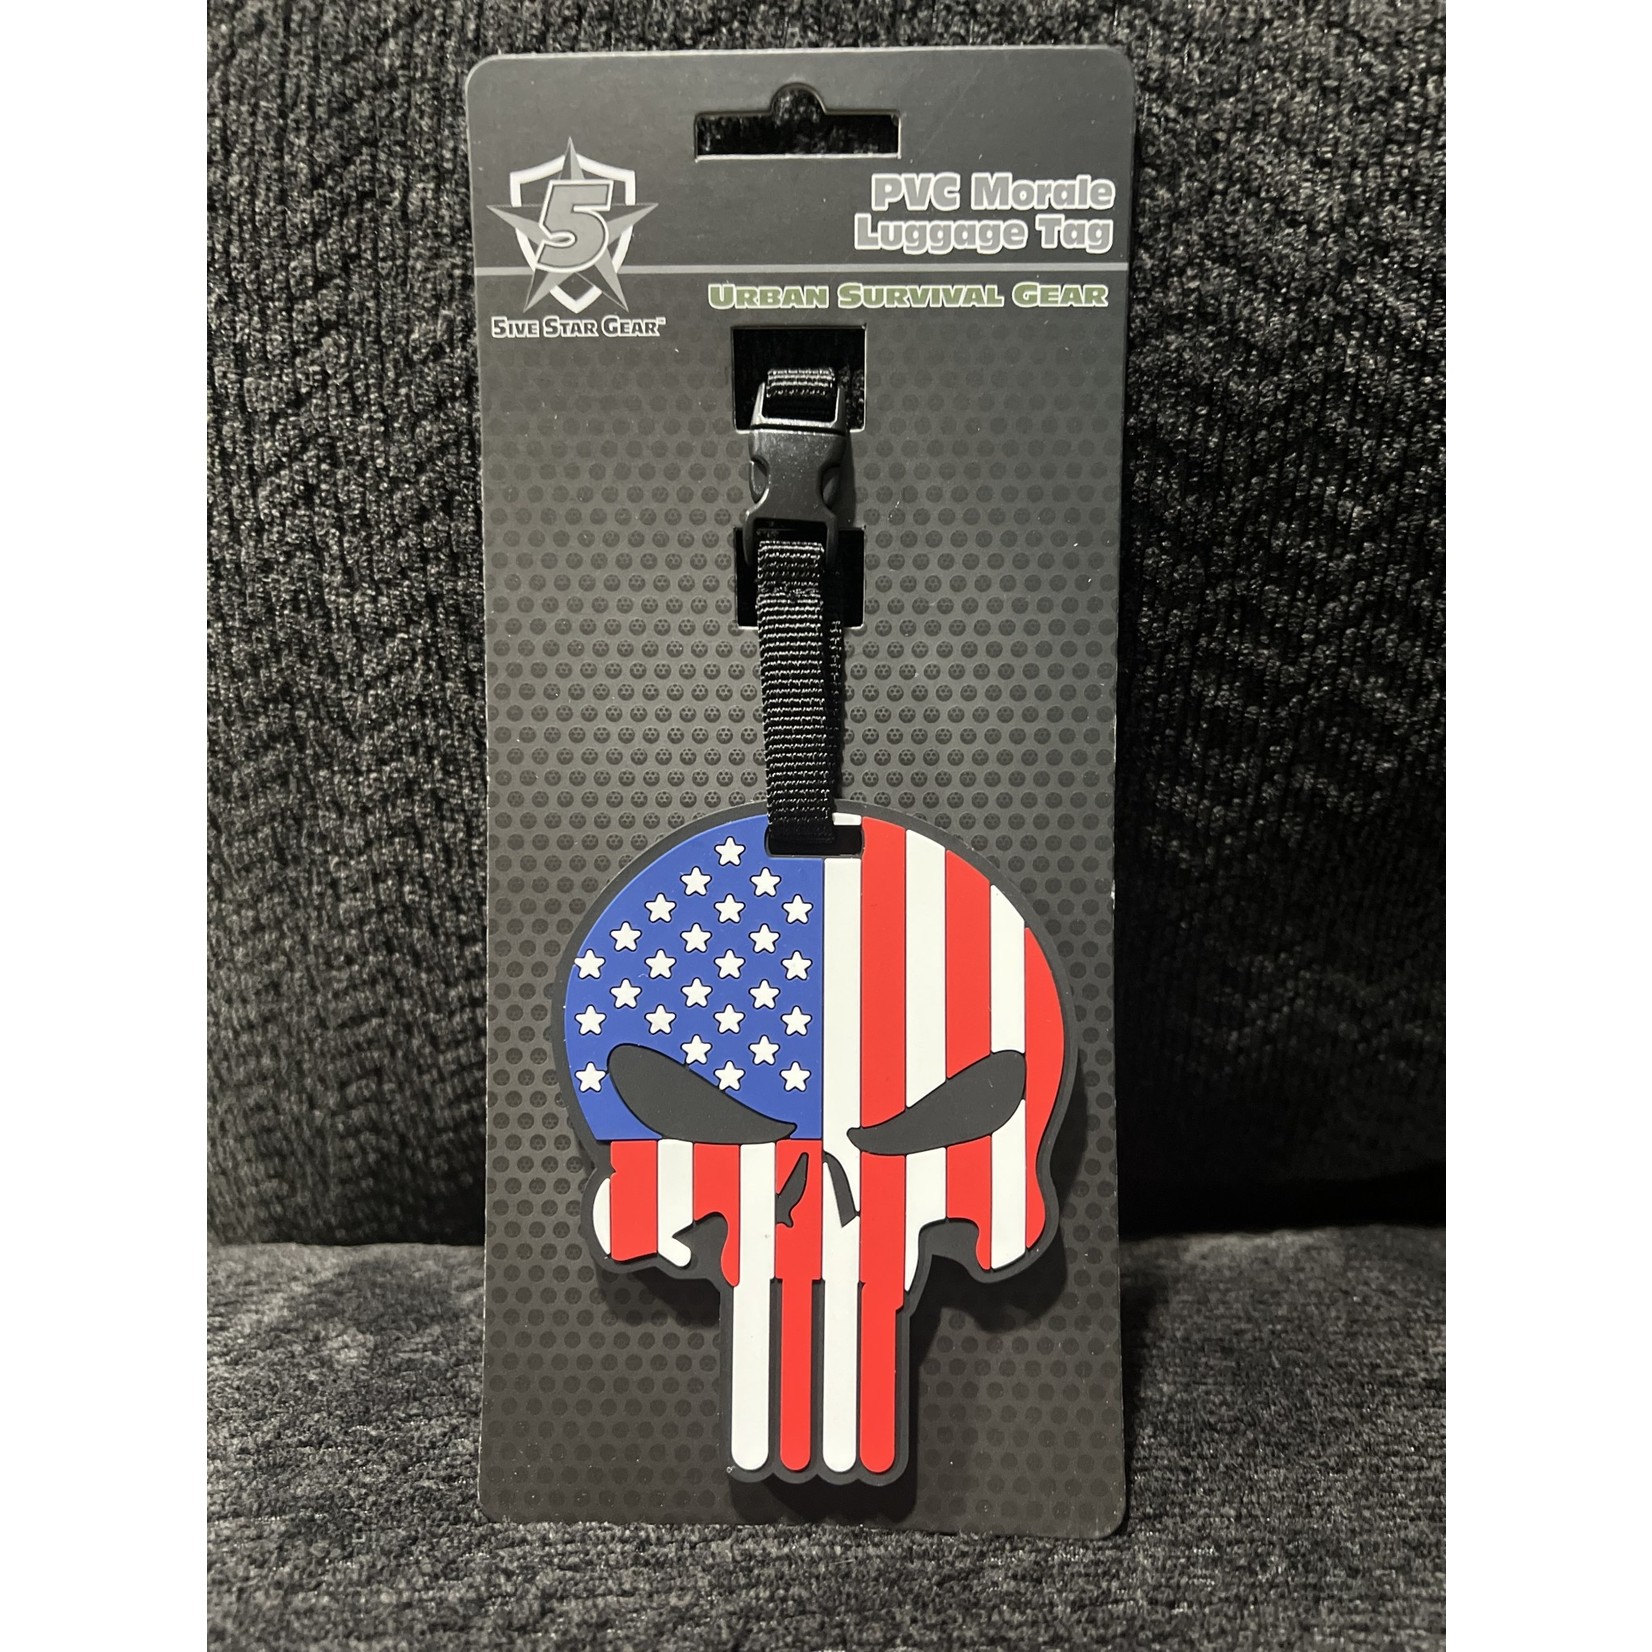 5ive Star Gear Patriotic Punisher Morale Luggage Tag